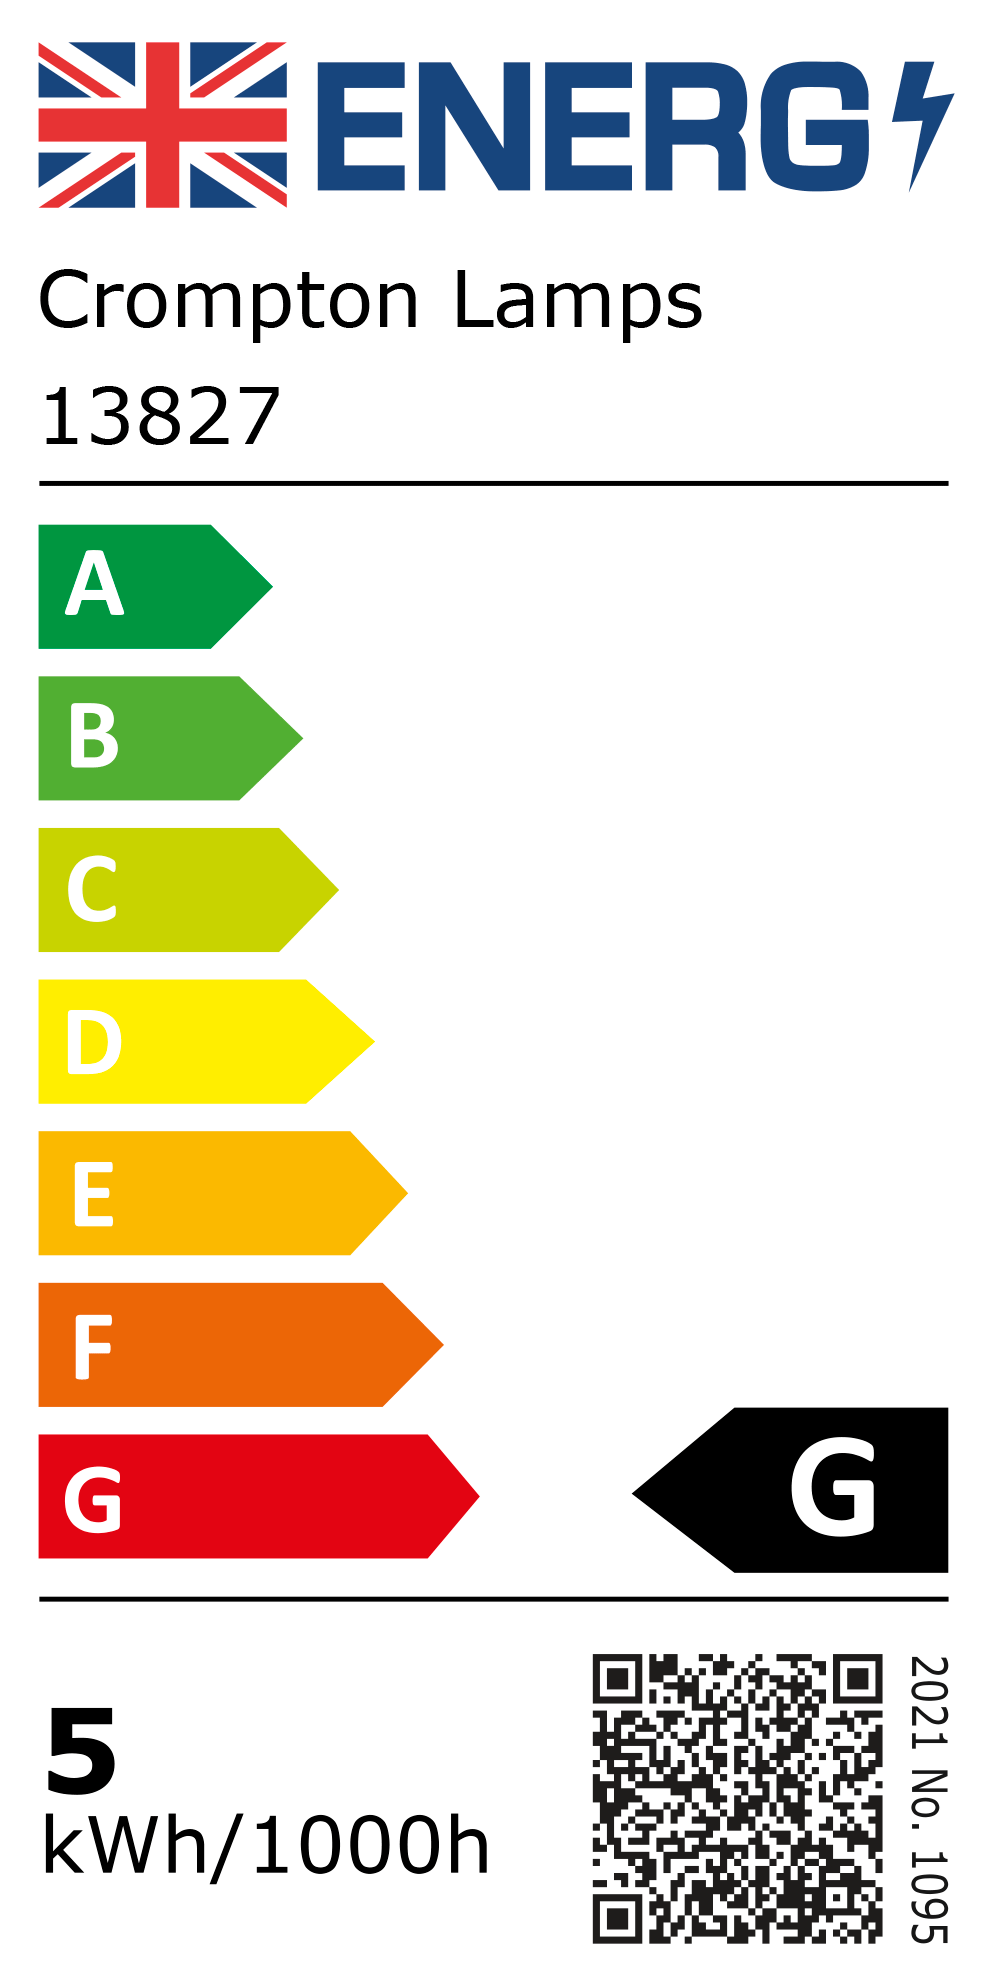 New 2021 Energy Rating Label: Stock Code 13827